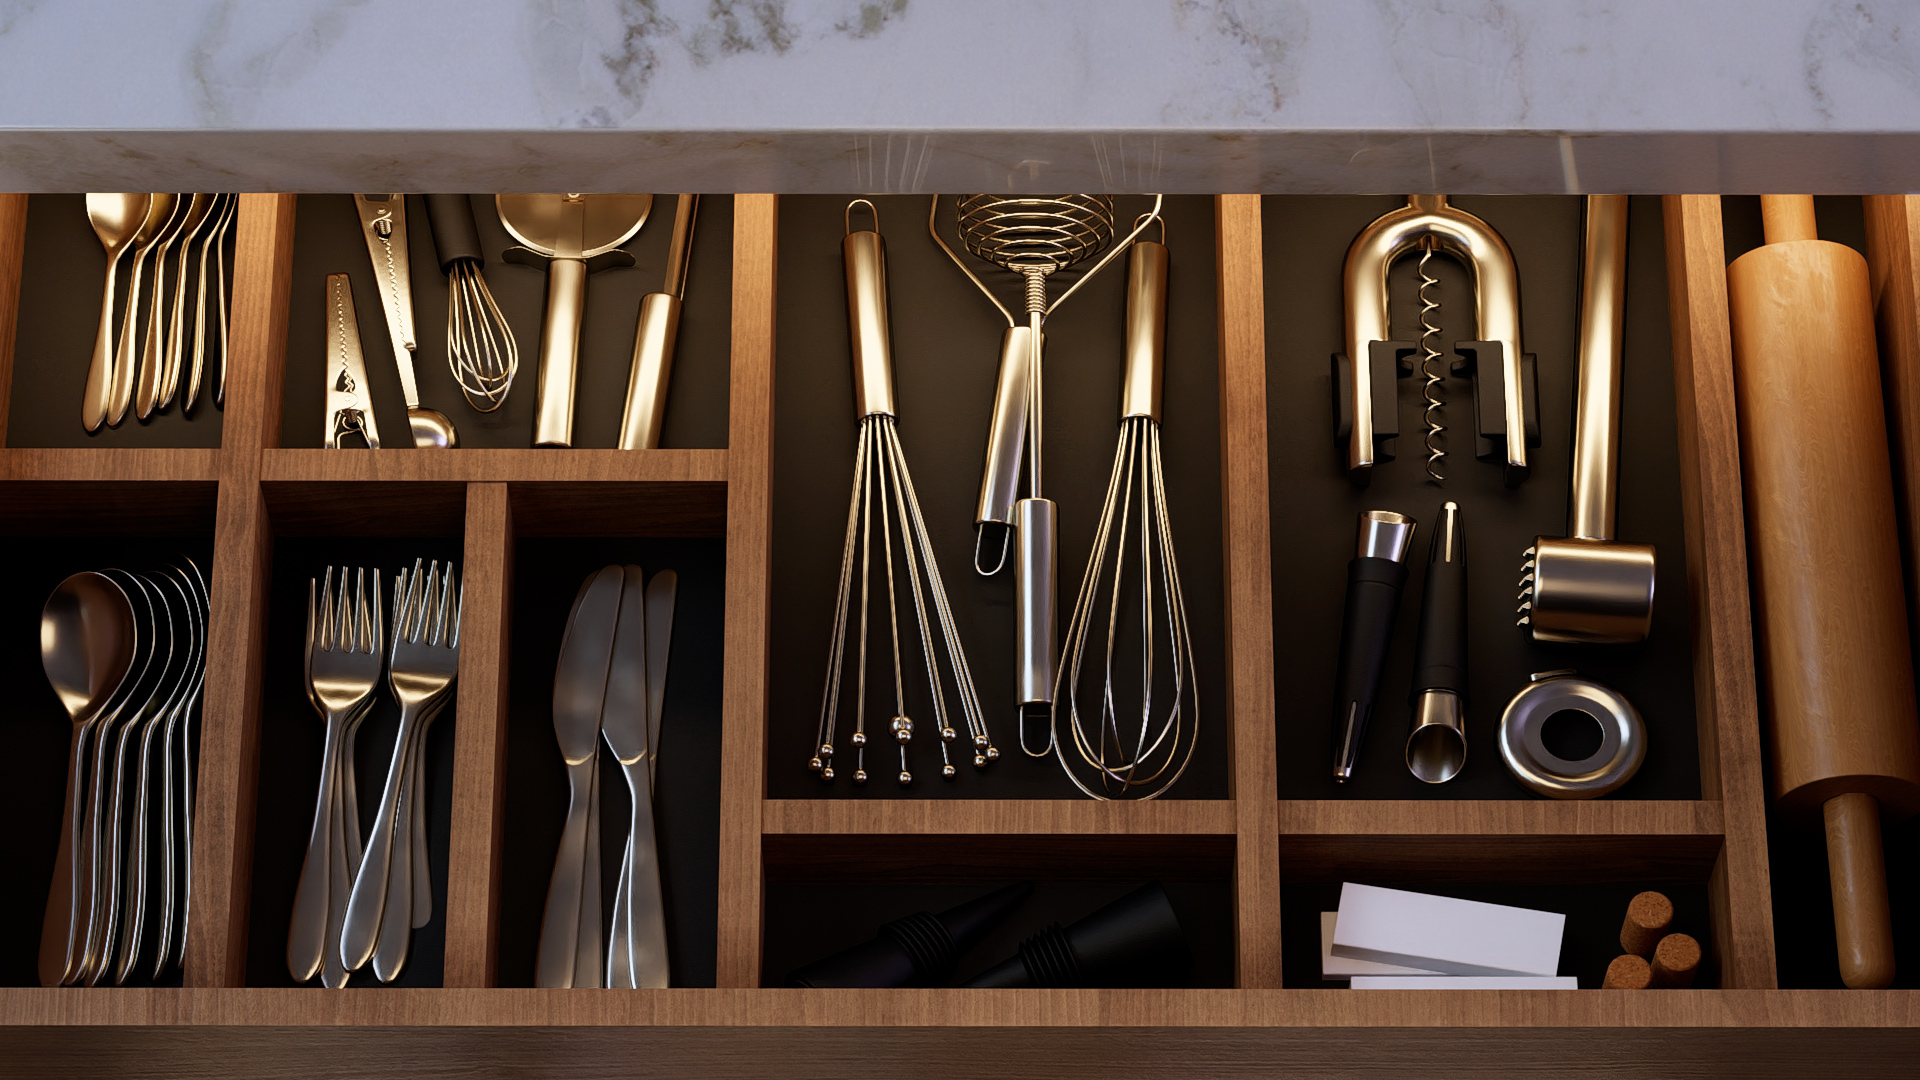 images/site/producten/Lumion/showcasegallery/ray-tracing-reflections-cutlery-RT.jpg#joomlaImage://local-images/site/producten/Lumion/showcasegallery/ray-tracing-reflections-cutlery-RT.jpg?width=1920&height=1080